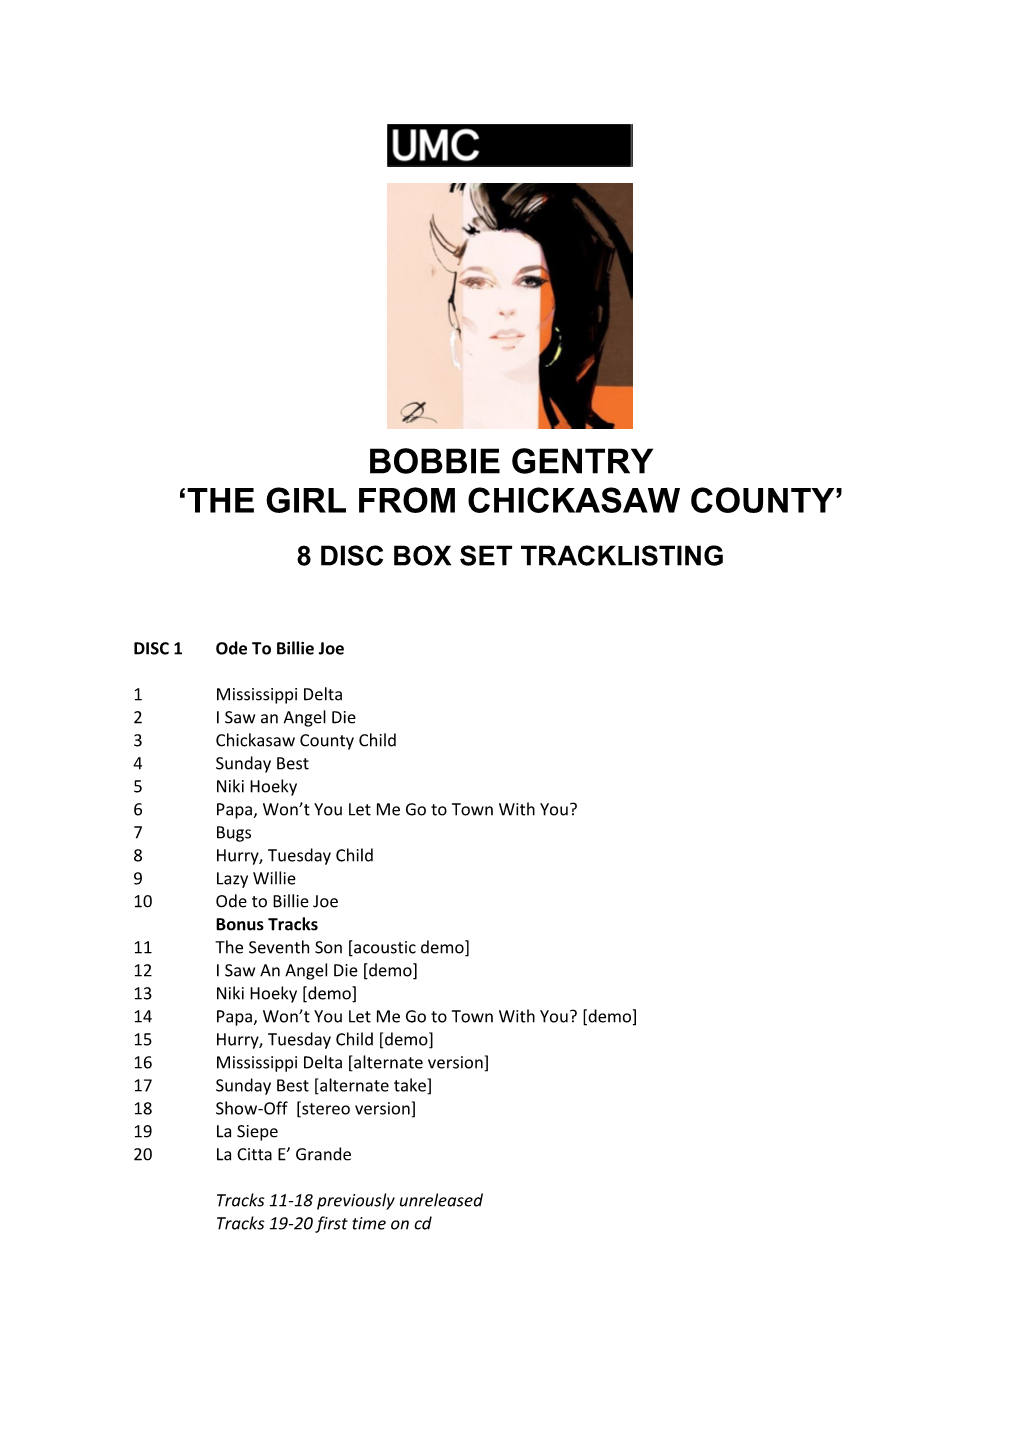 Bobbie Gentry 'The Girl from Chickasaw County'